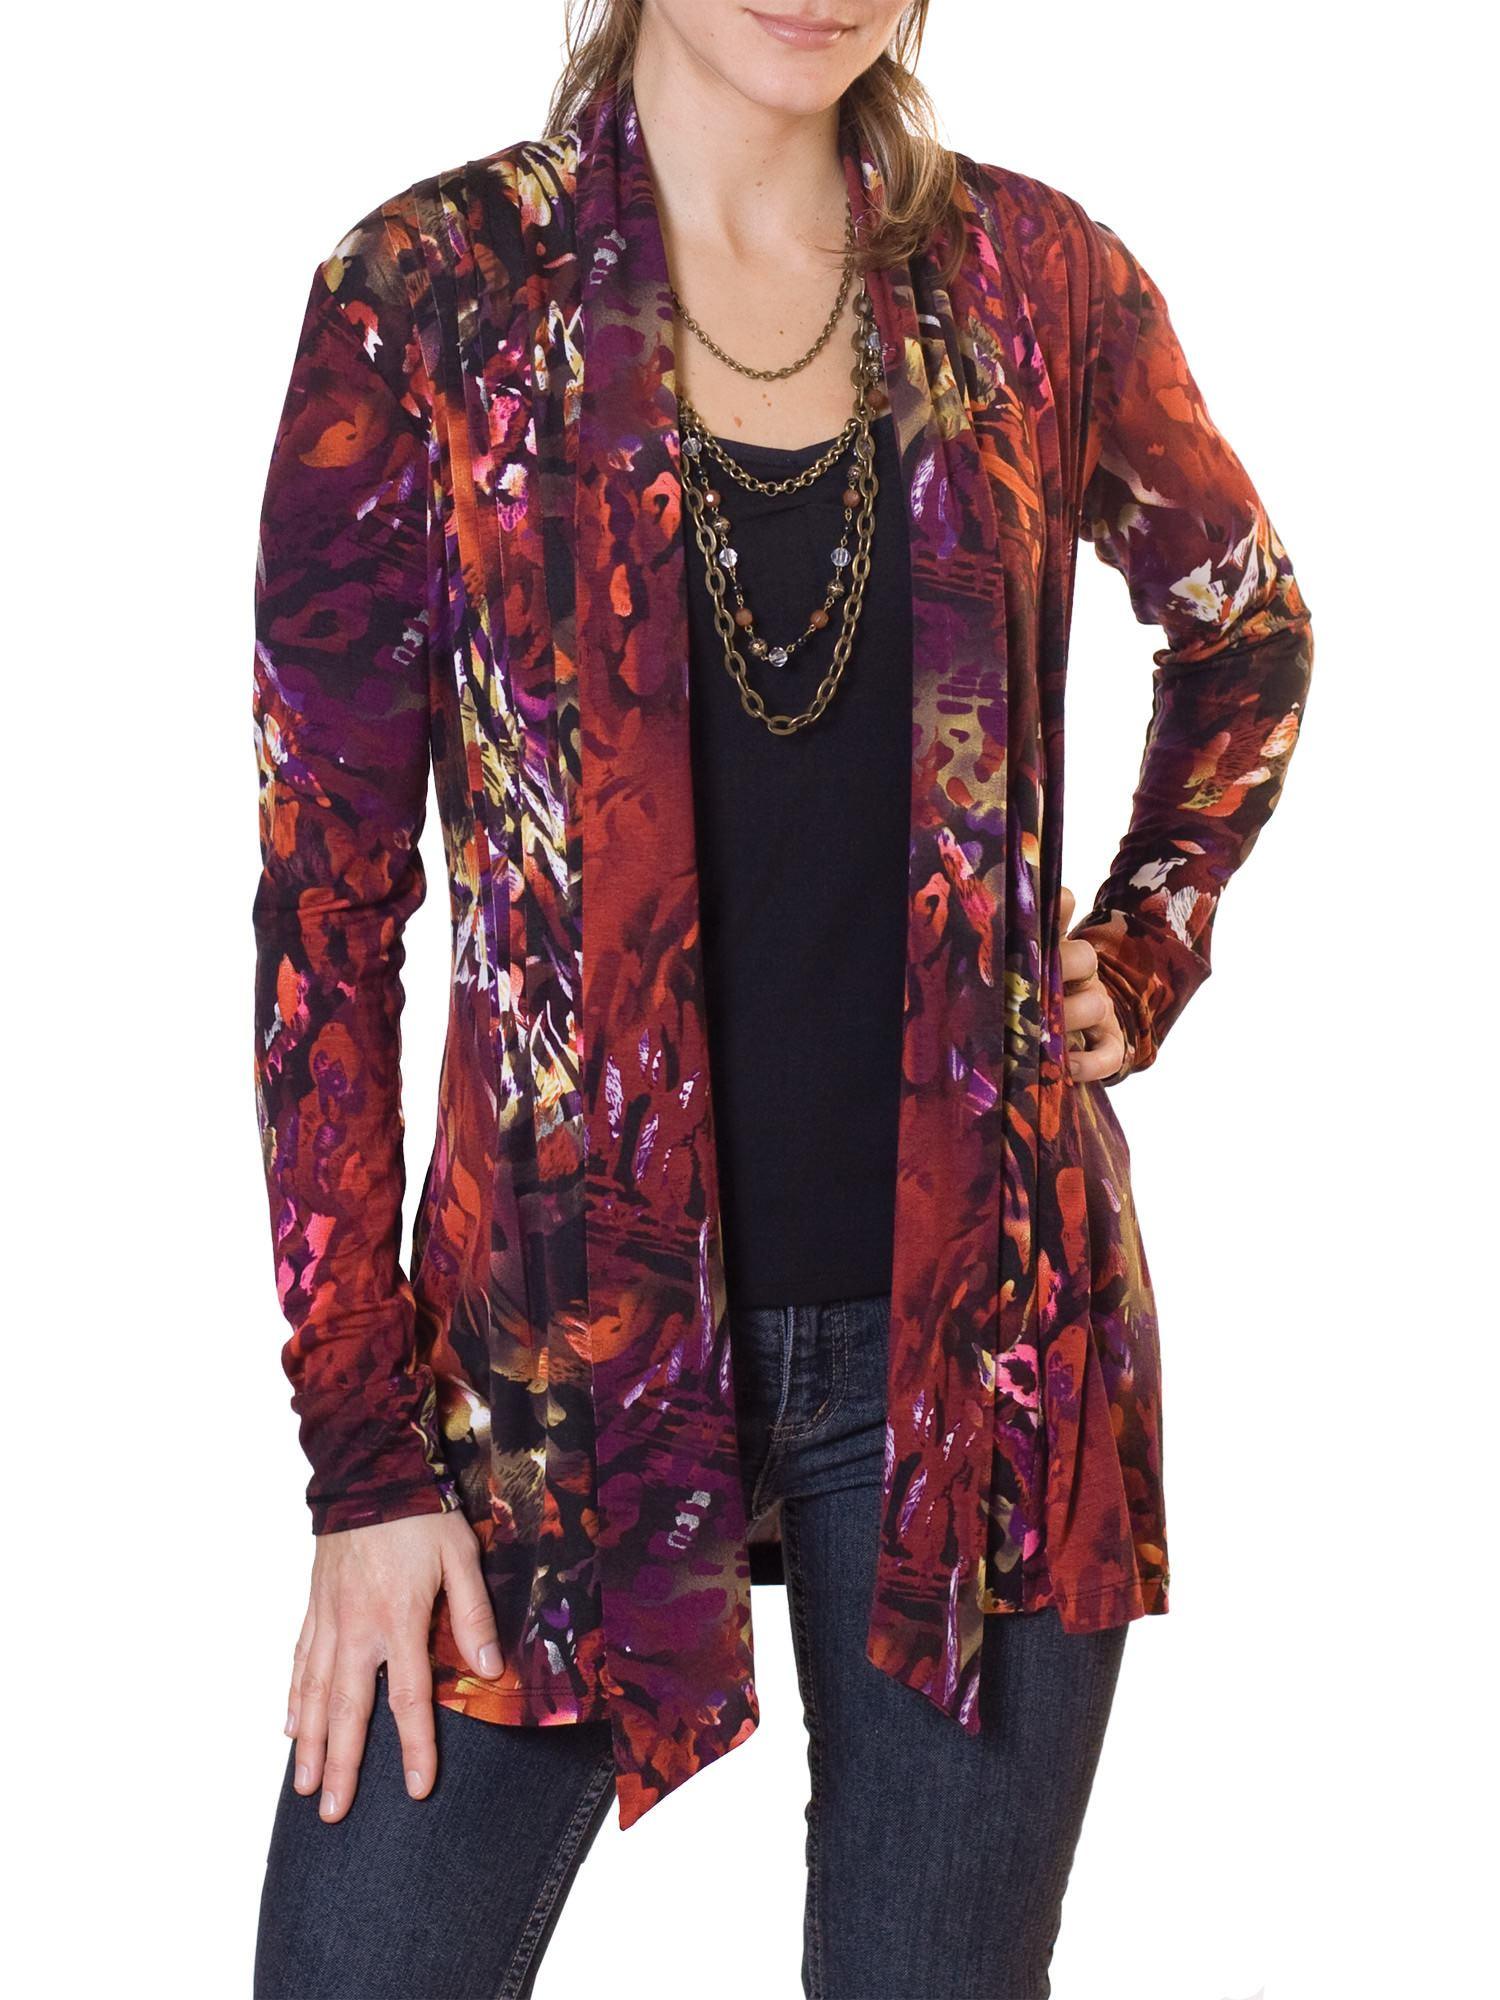 Jalie 2919 - Pleated cardigan in a printed rayon/spandex